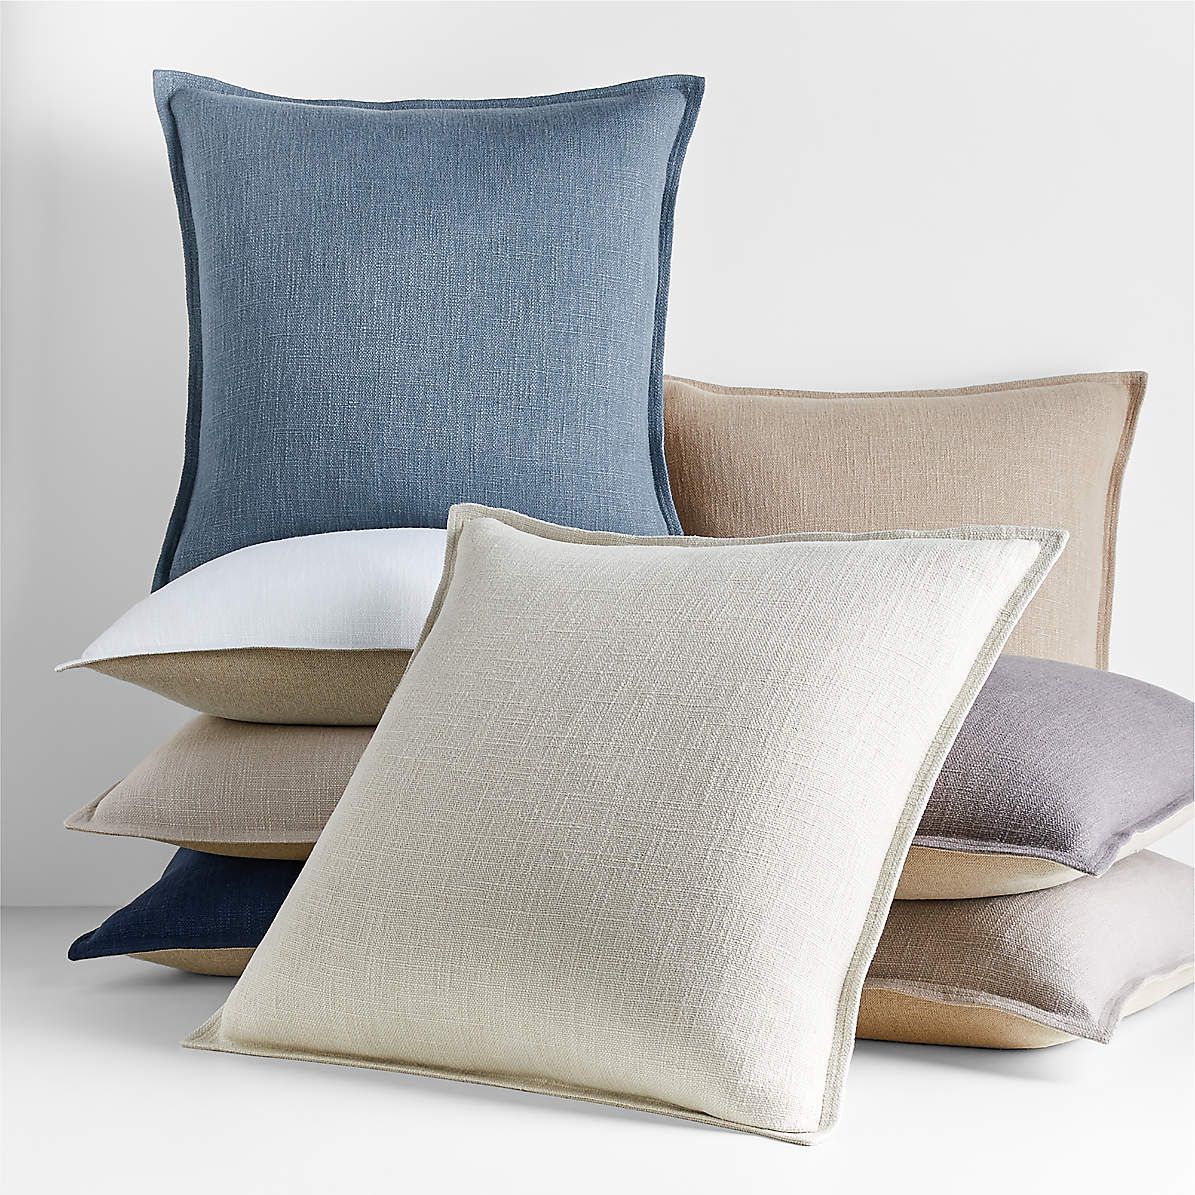 Details about   Sferra Pillow Sham Taupe/white Linen Size 20”X20”NEW Works With Different Sets 